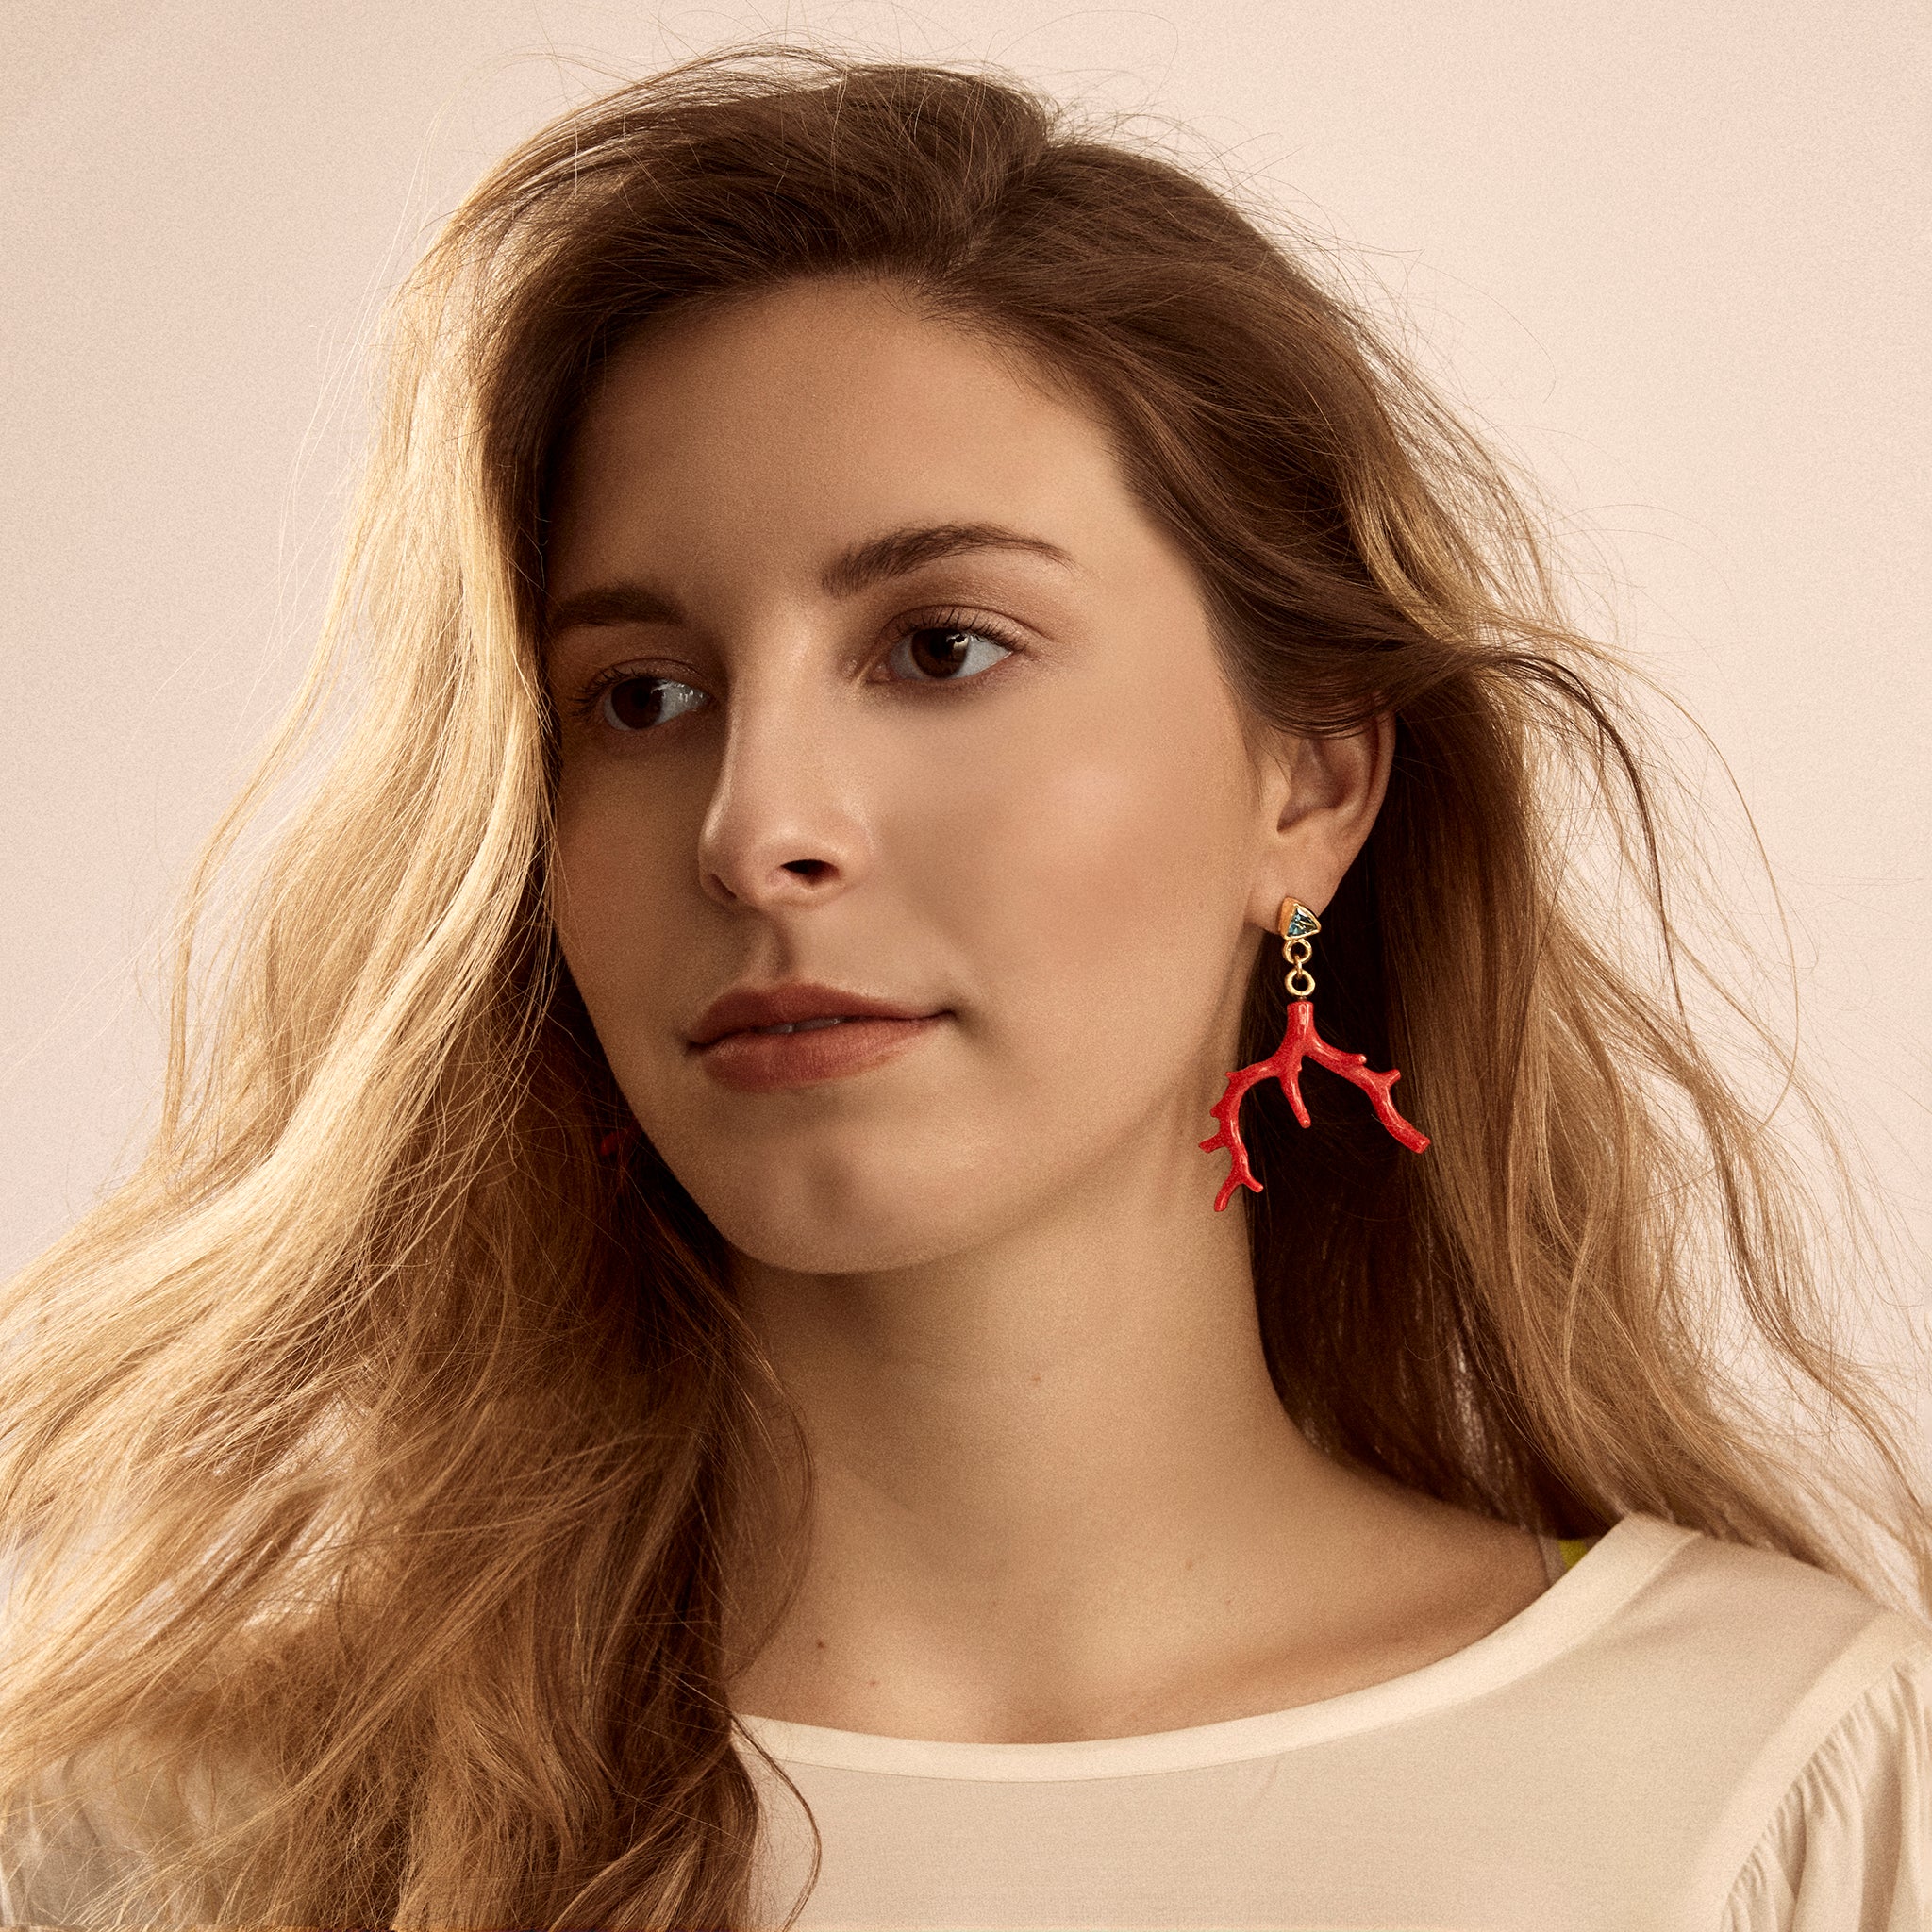 Coral and Water Earrings